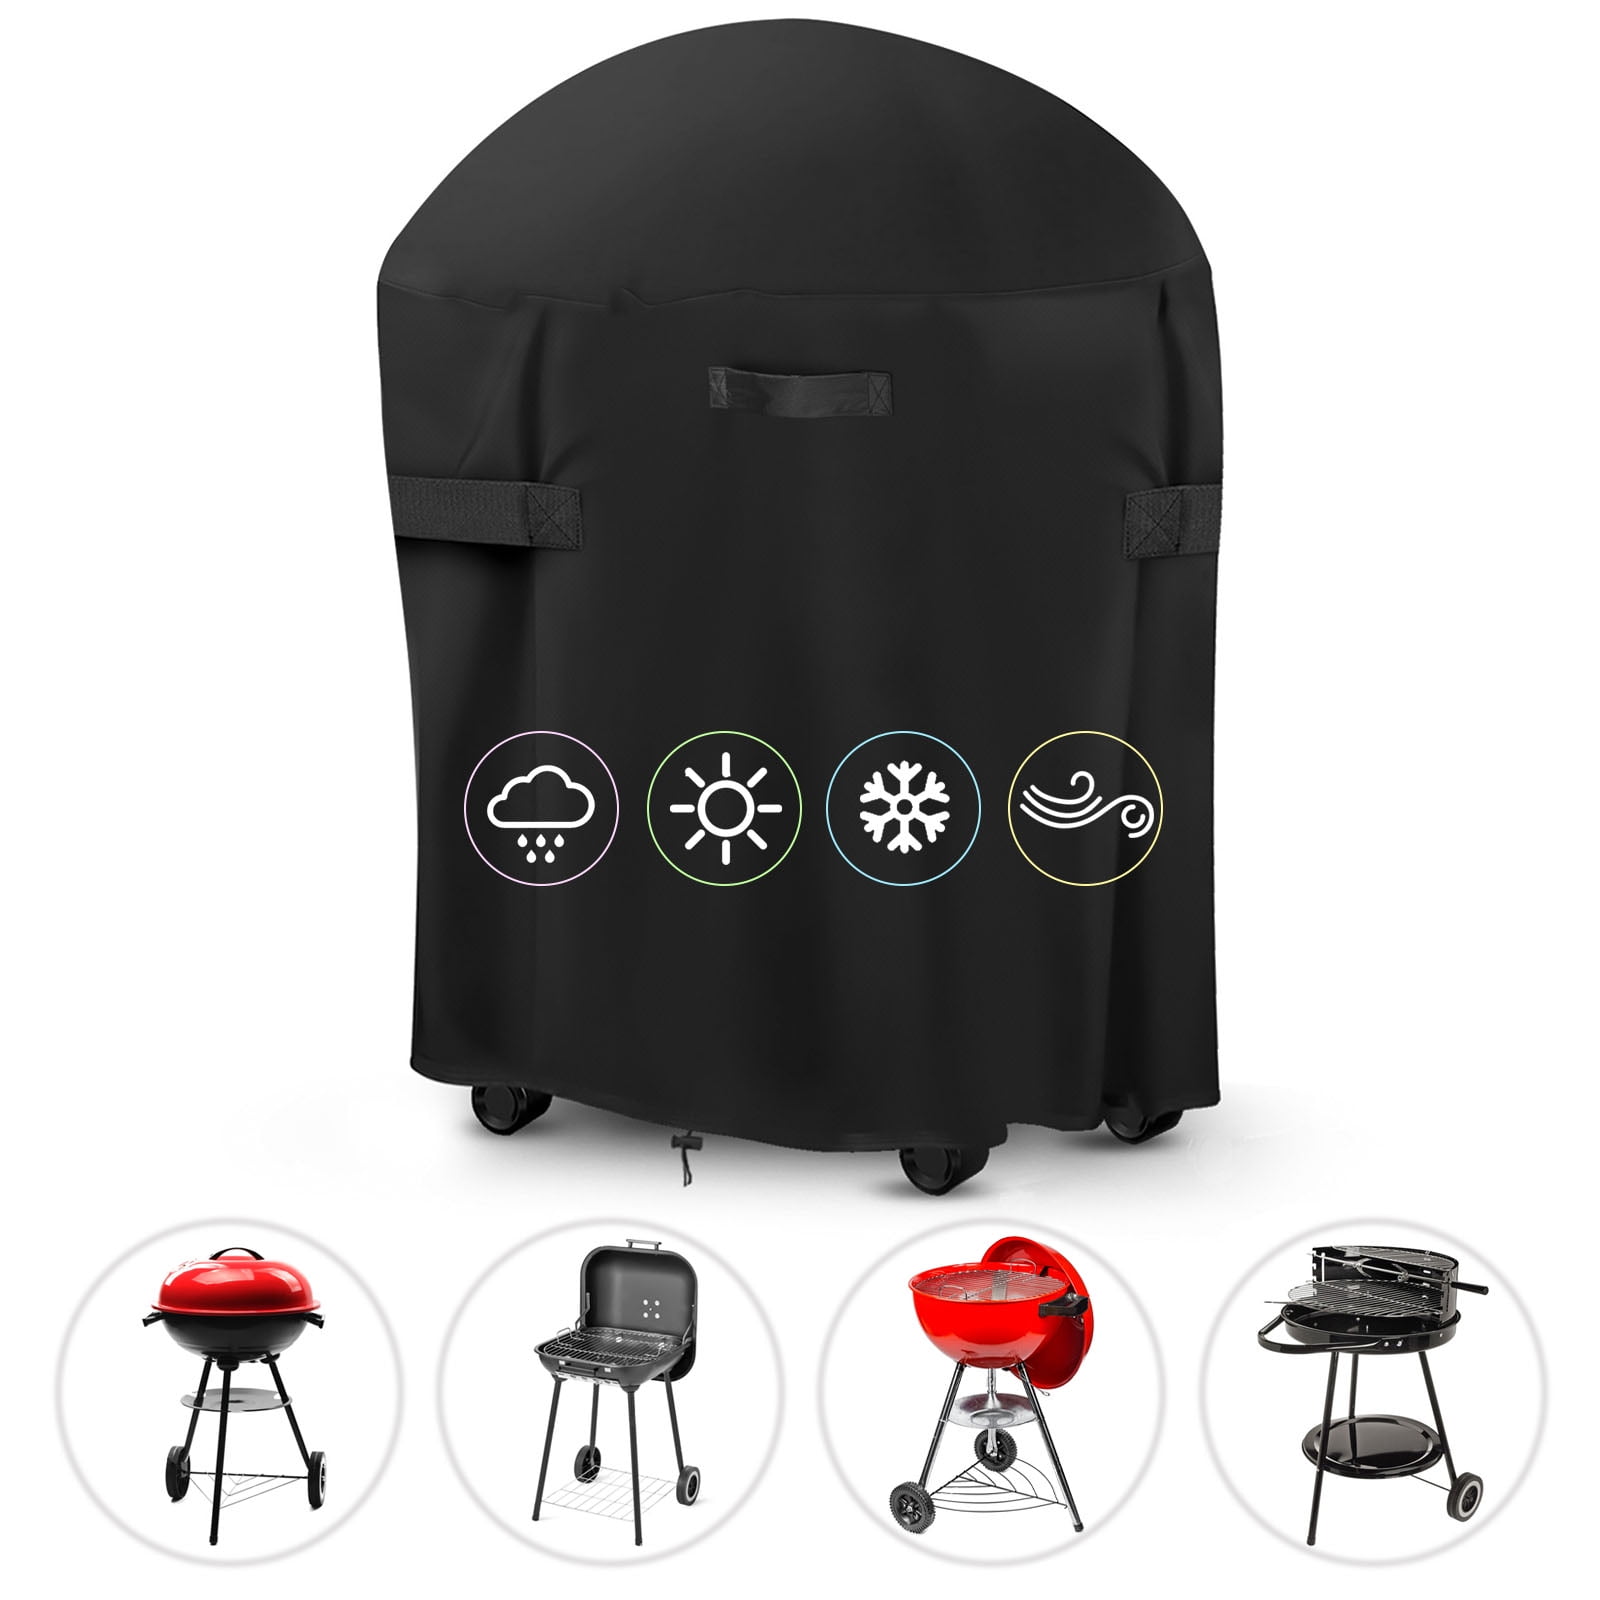 31 Sizes BBQ Cover Gril Barbeque Kettle Protector For Weber Dust Waterproof 